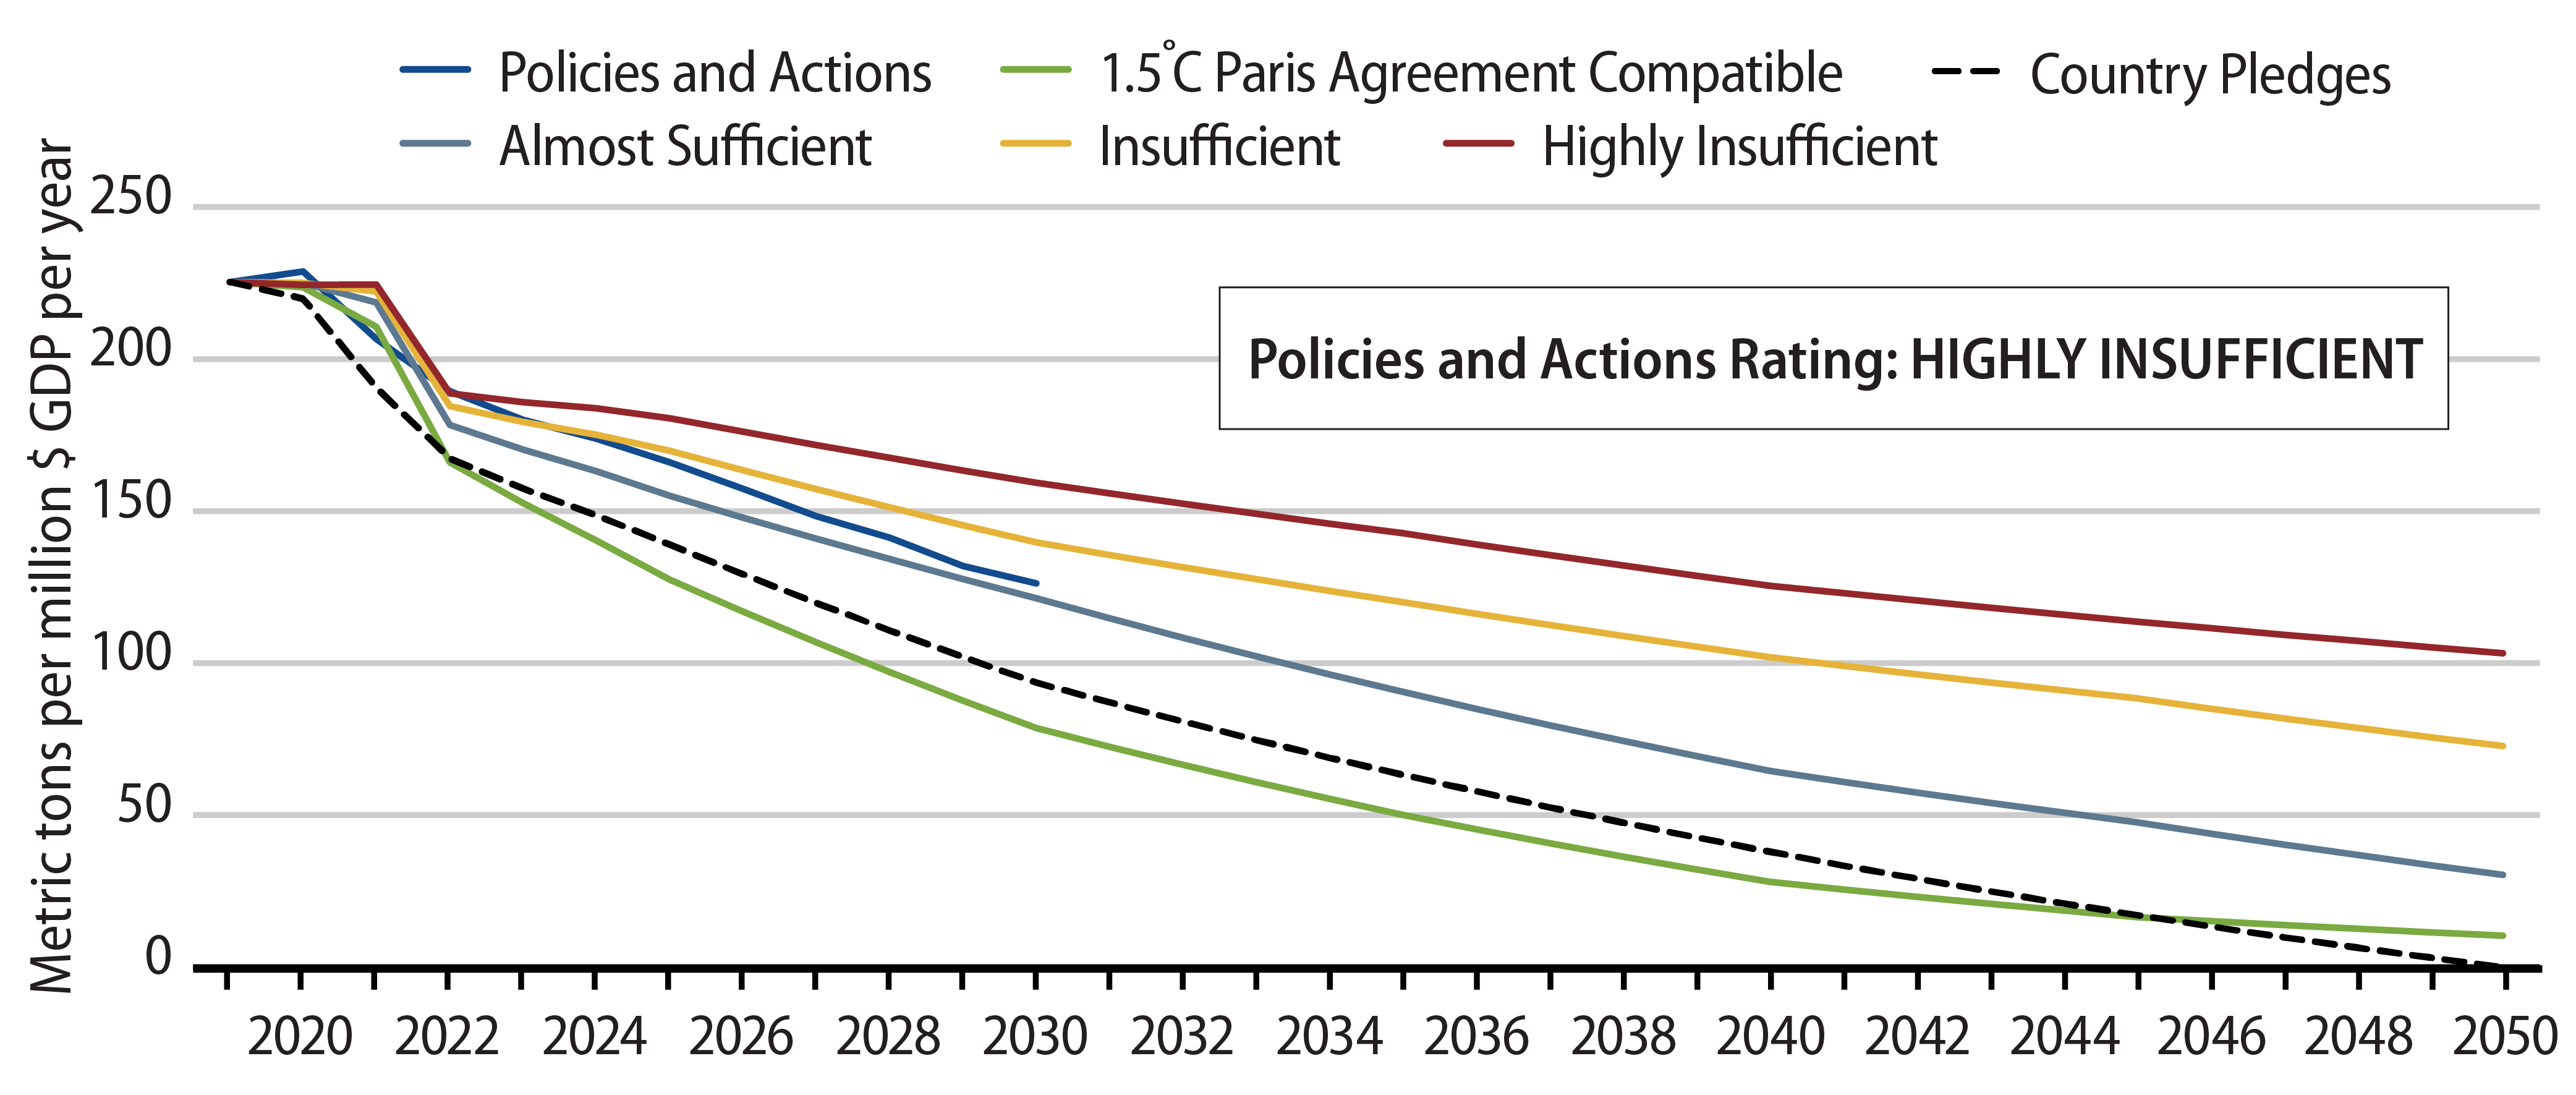 United States - Carbon Intensity Pathway